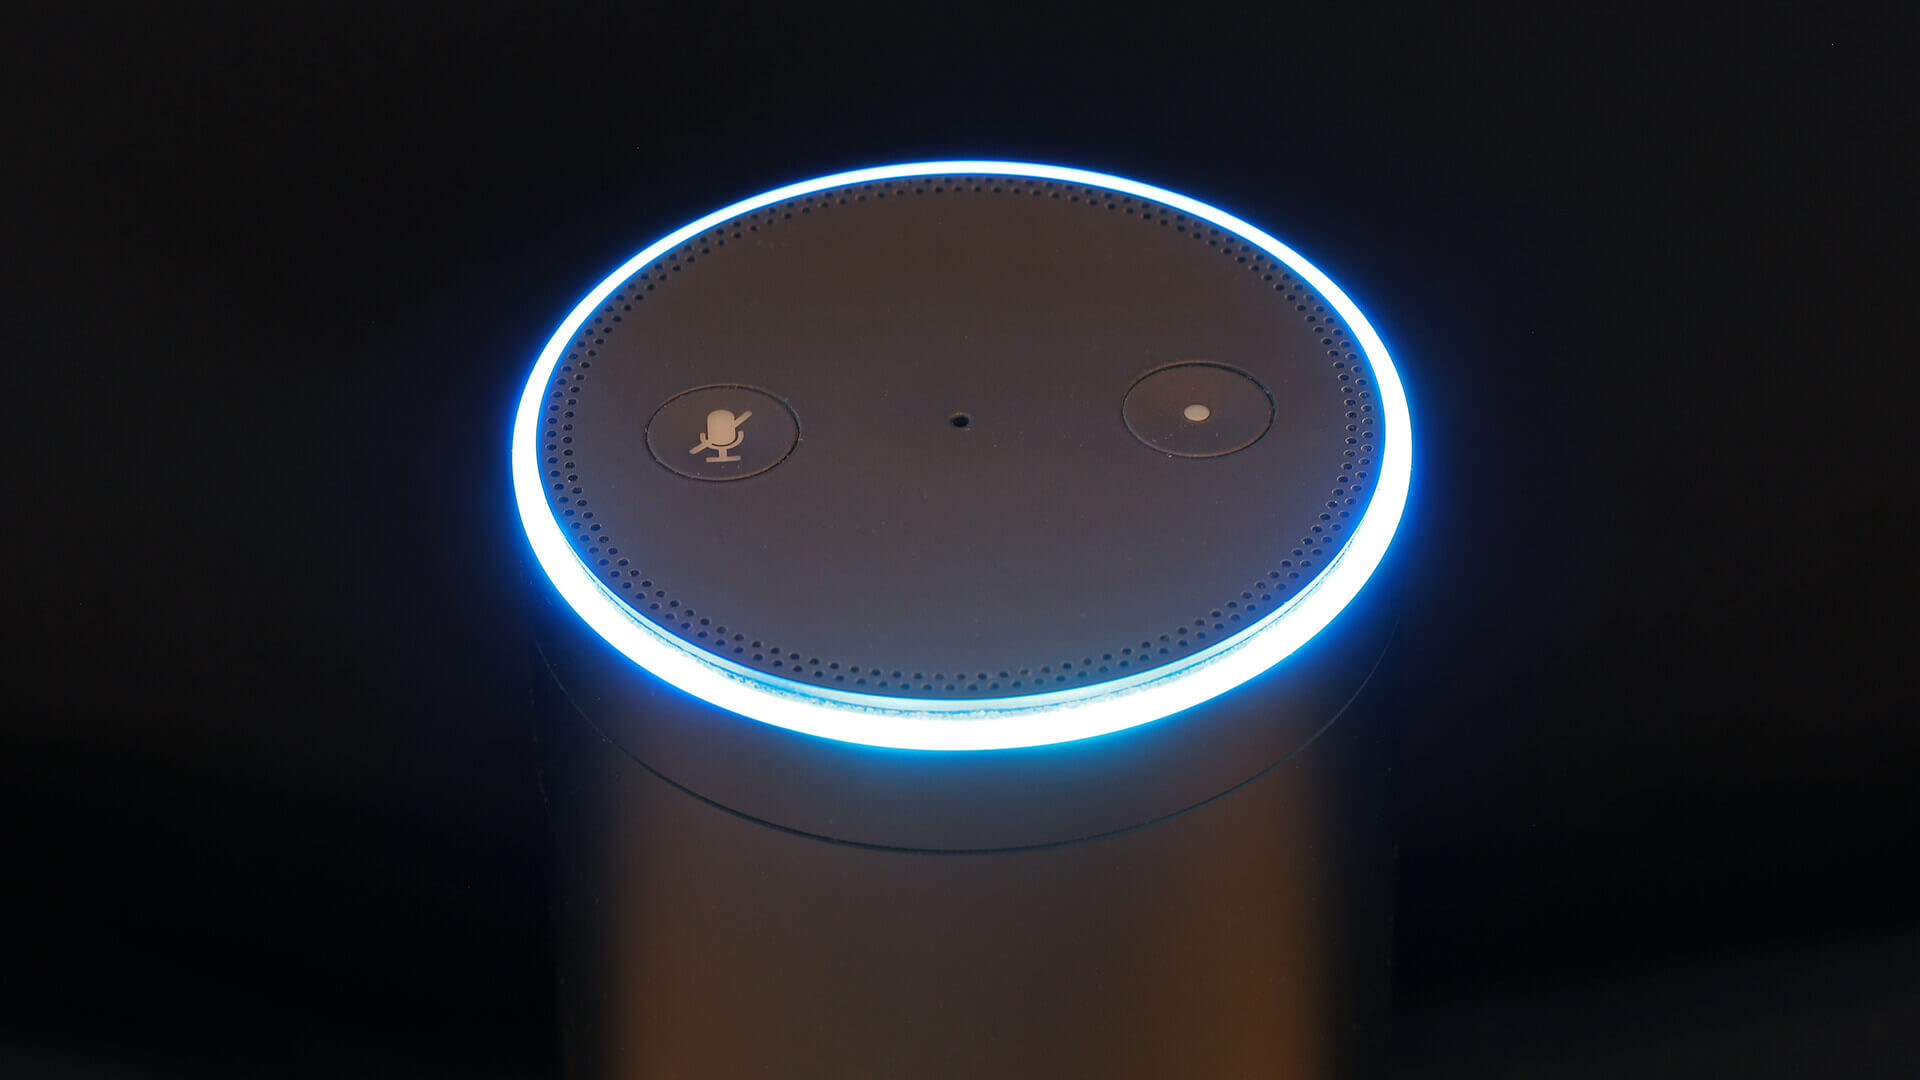 Privacy issues may be hurting smart speaker market growth